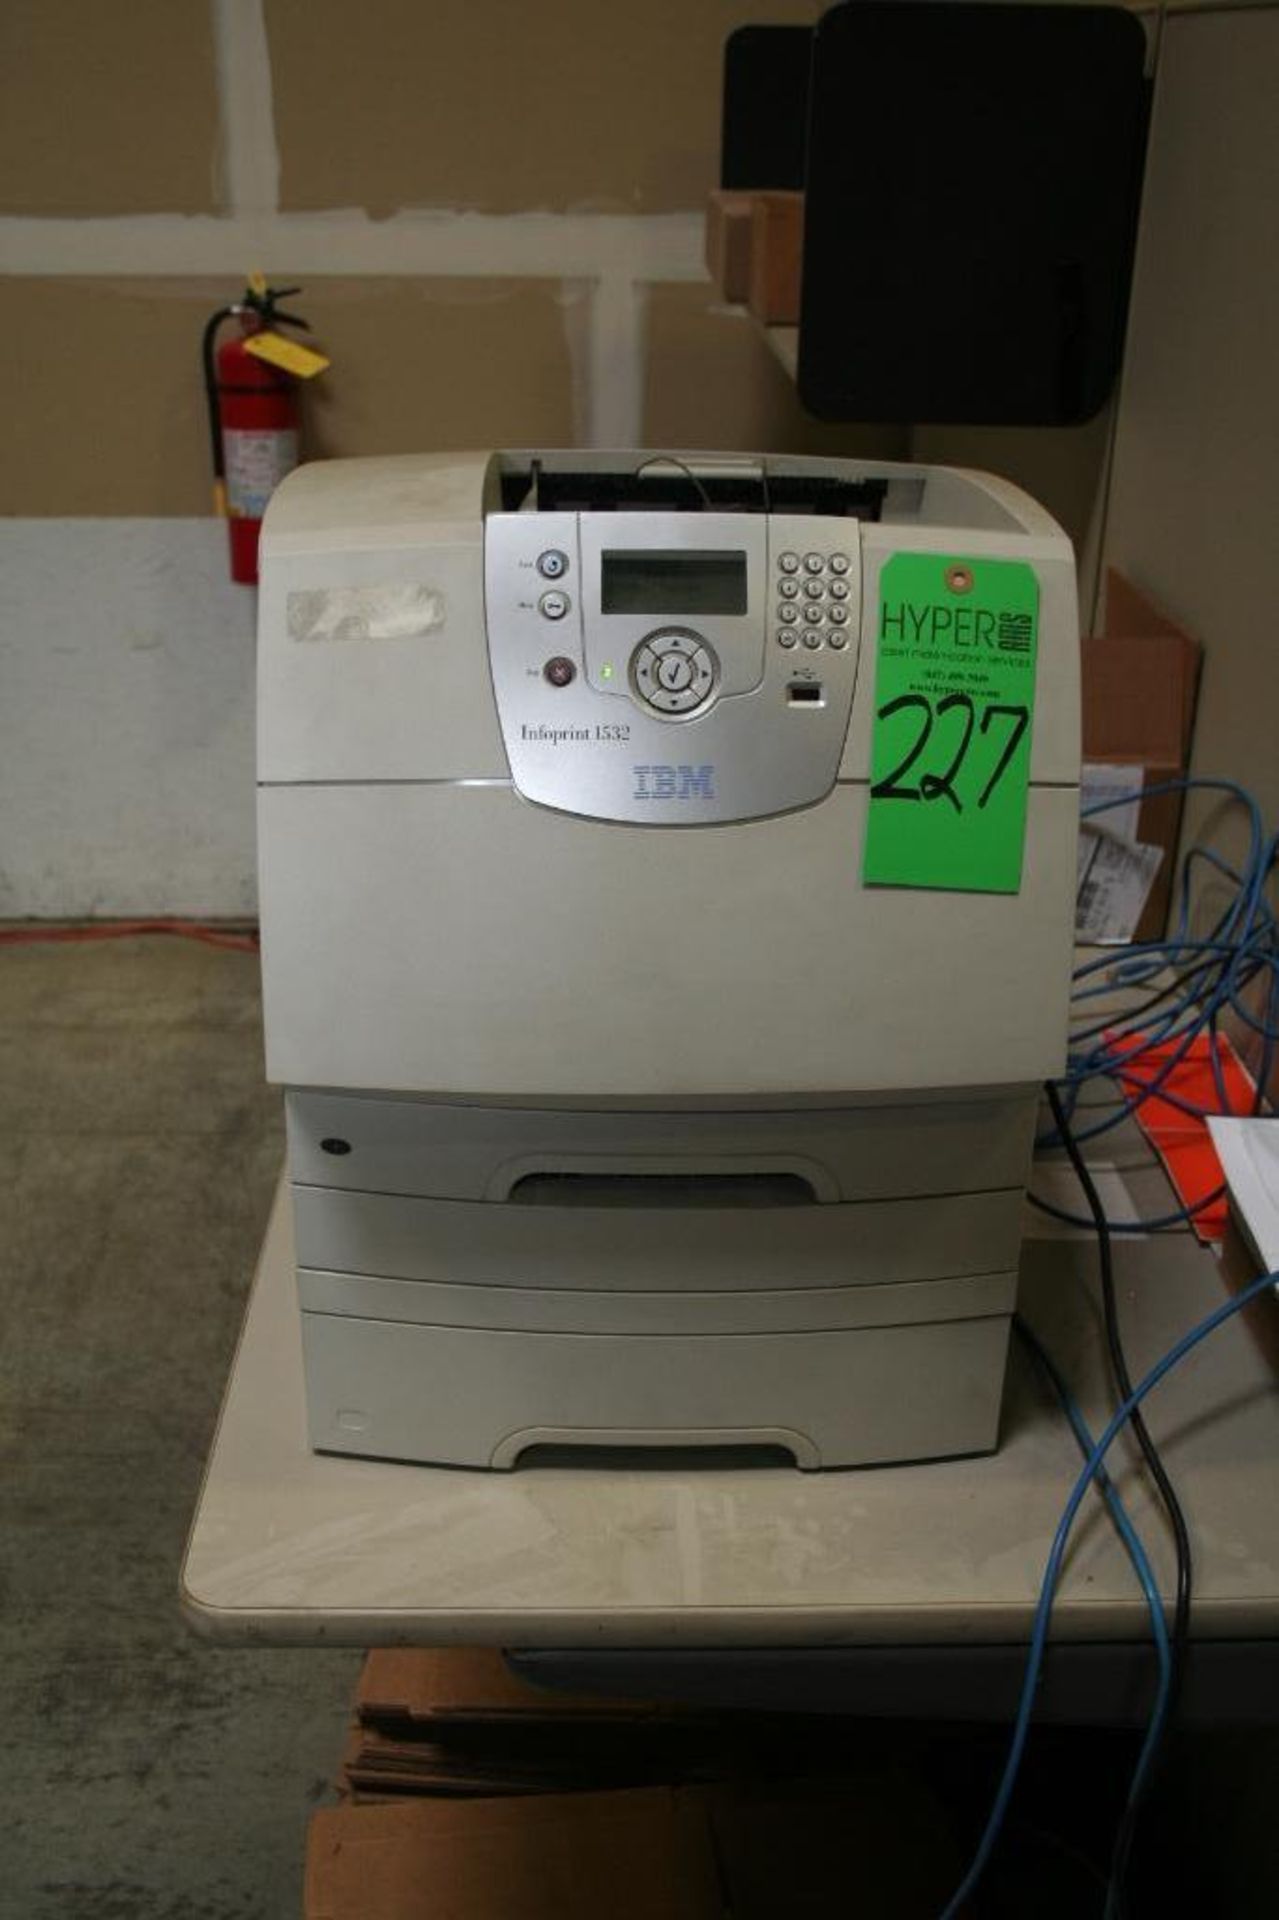 IBM Printer Infoprint 1532, LATE DELIVERY AUGUST 1, 2018, Located at 3002 North Apollo Drive Urbana,